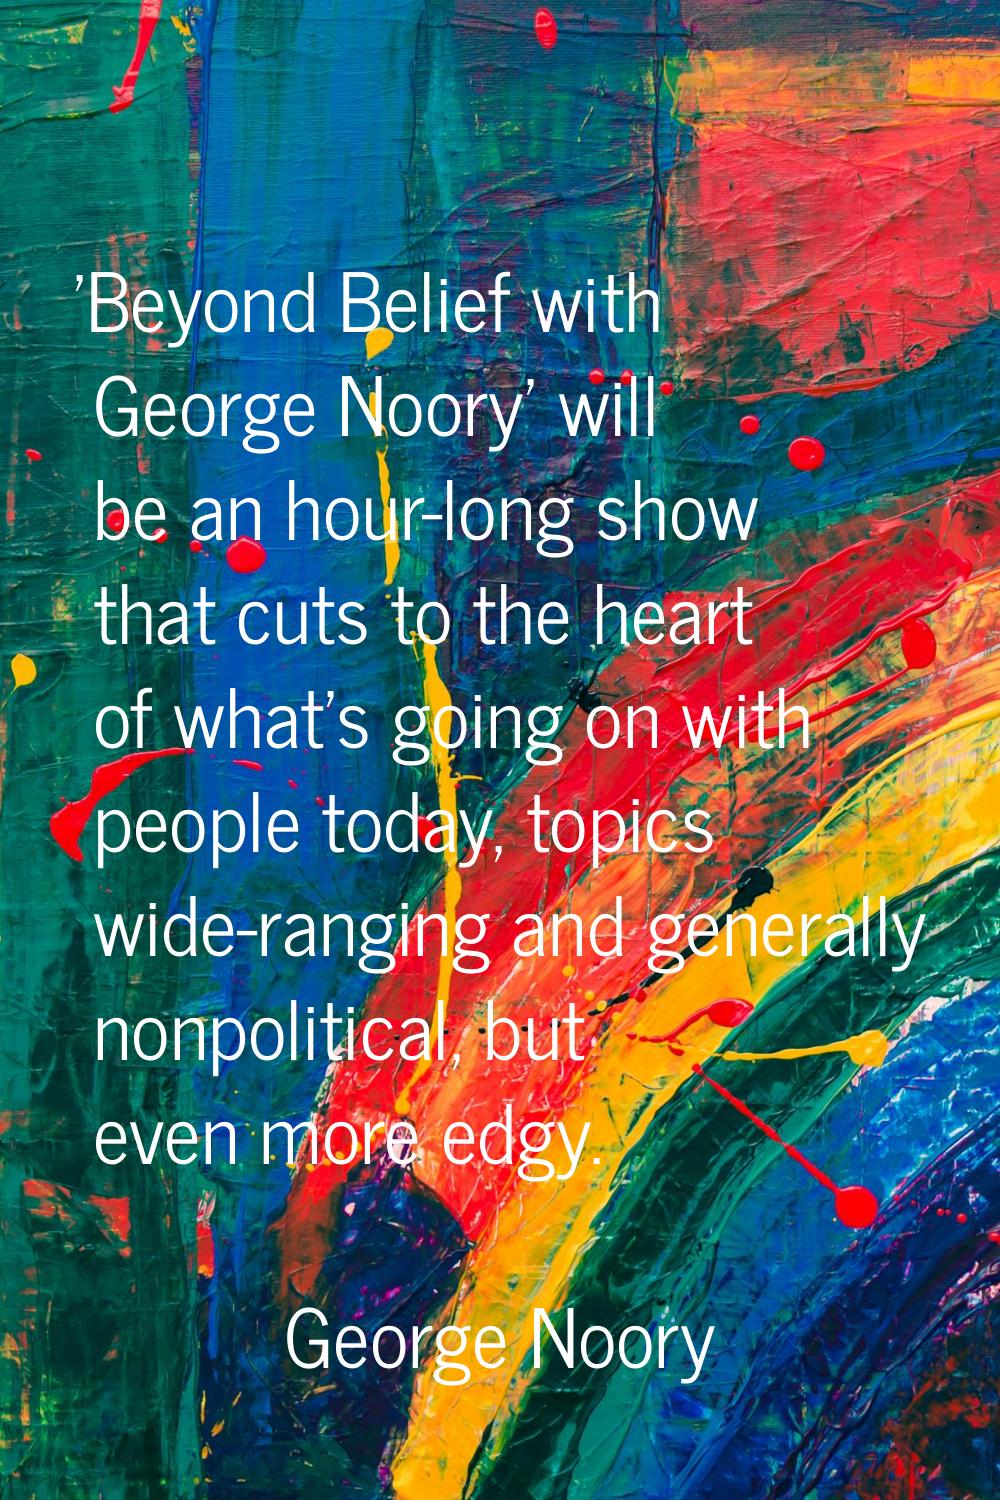 'Beyond Belief with George Noory' will be an hour-long show that cuts to the heart of what's going 